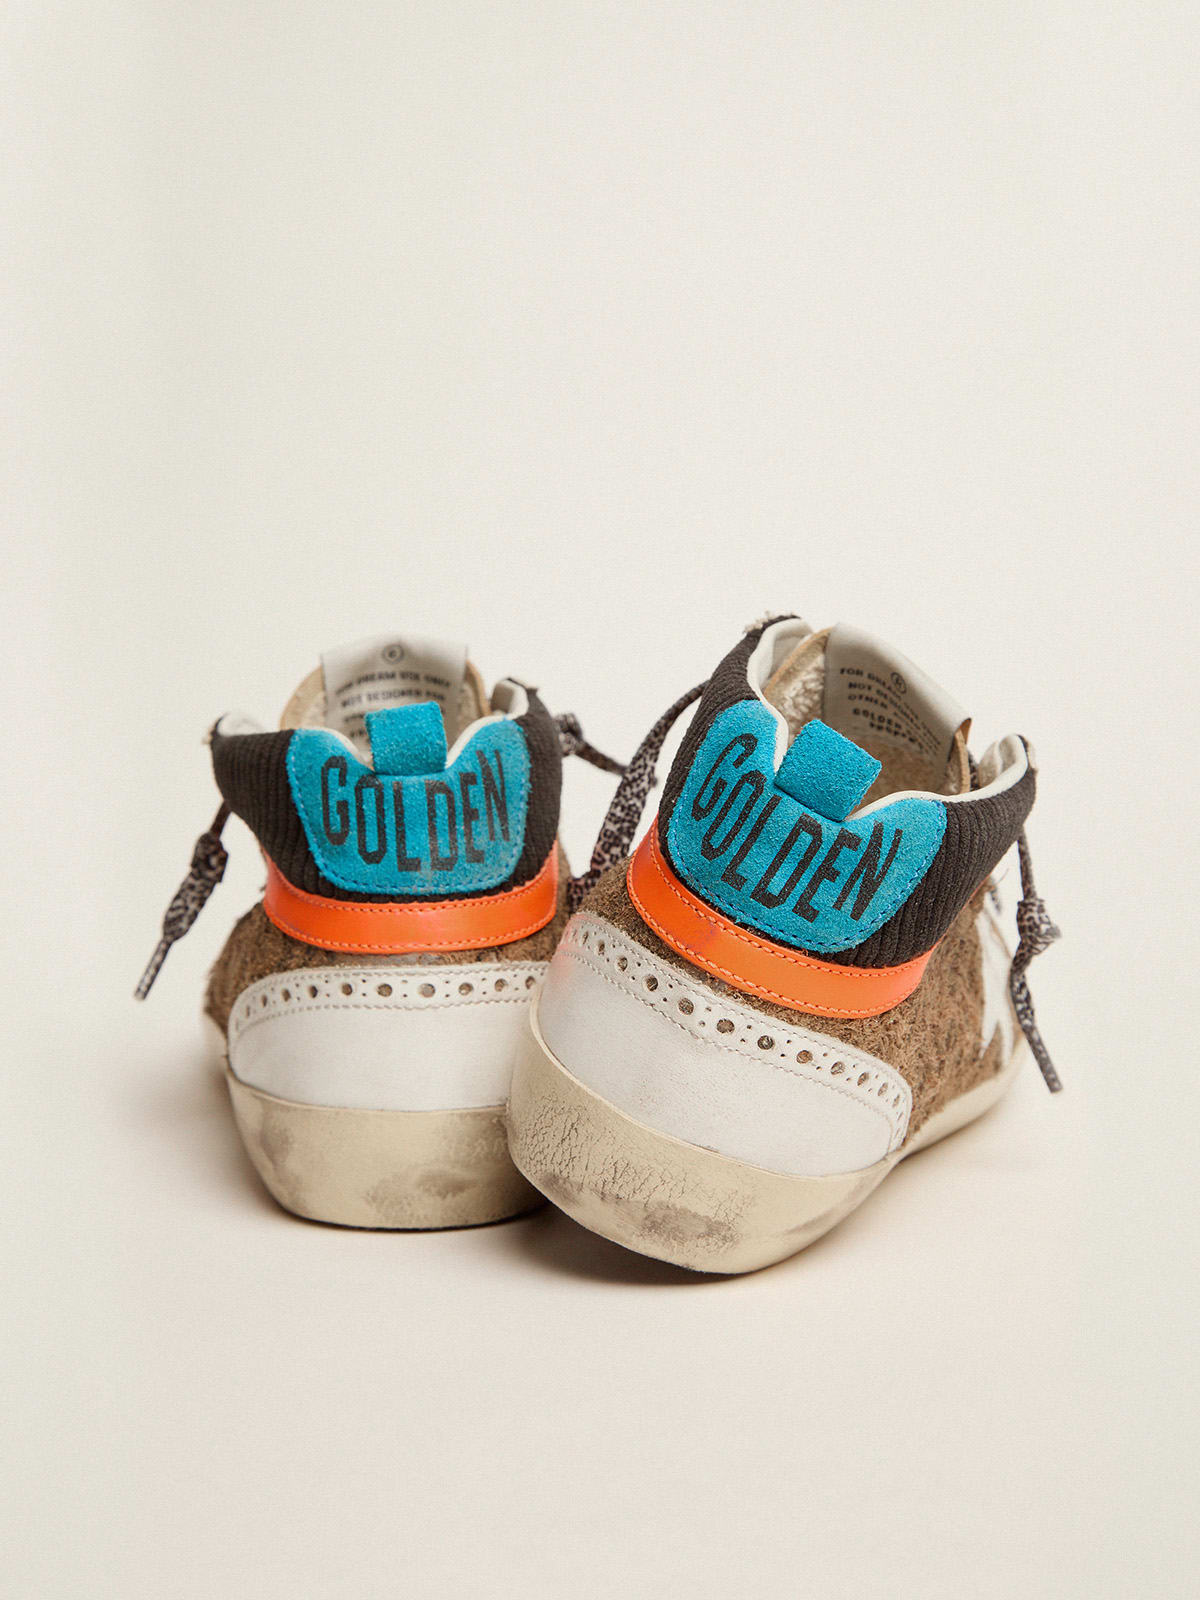 Golden Goose - Mid Star LTD sneakers with leopard-print and corduroy suede upper in 